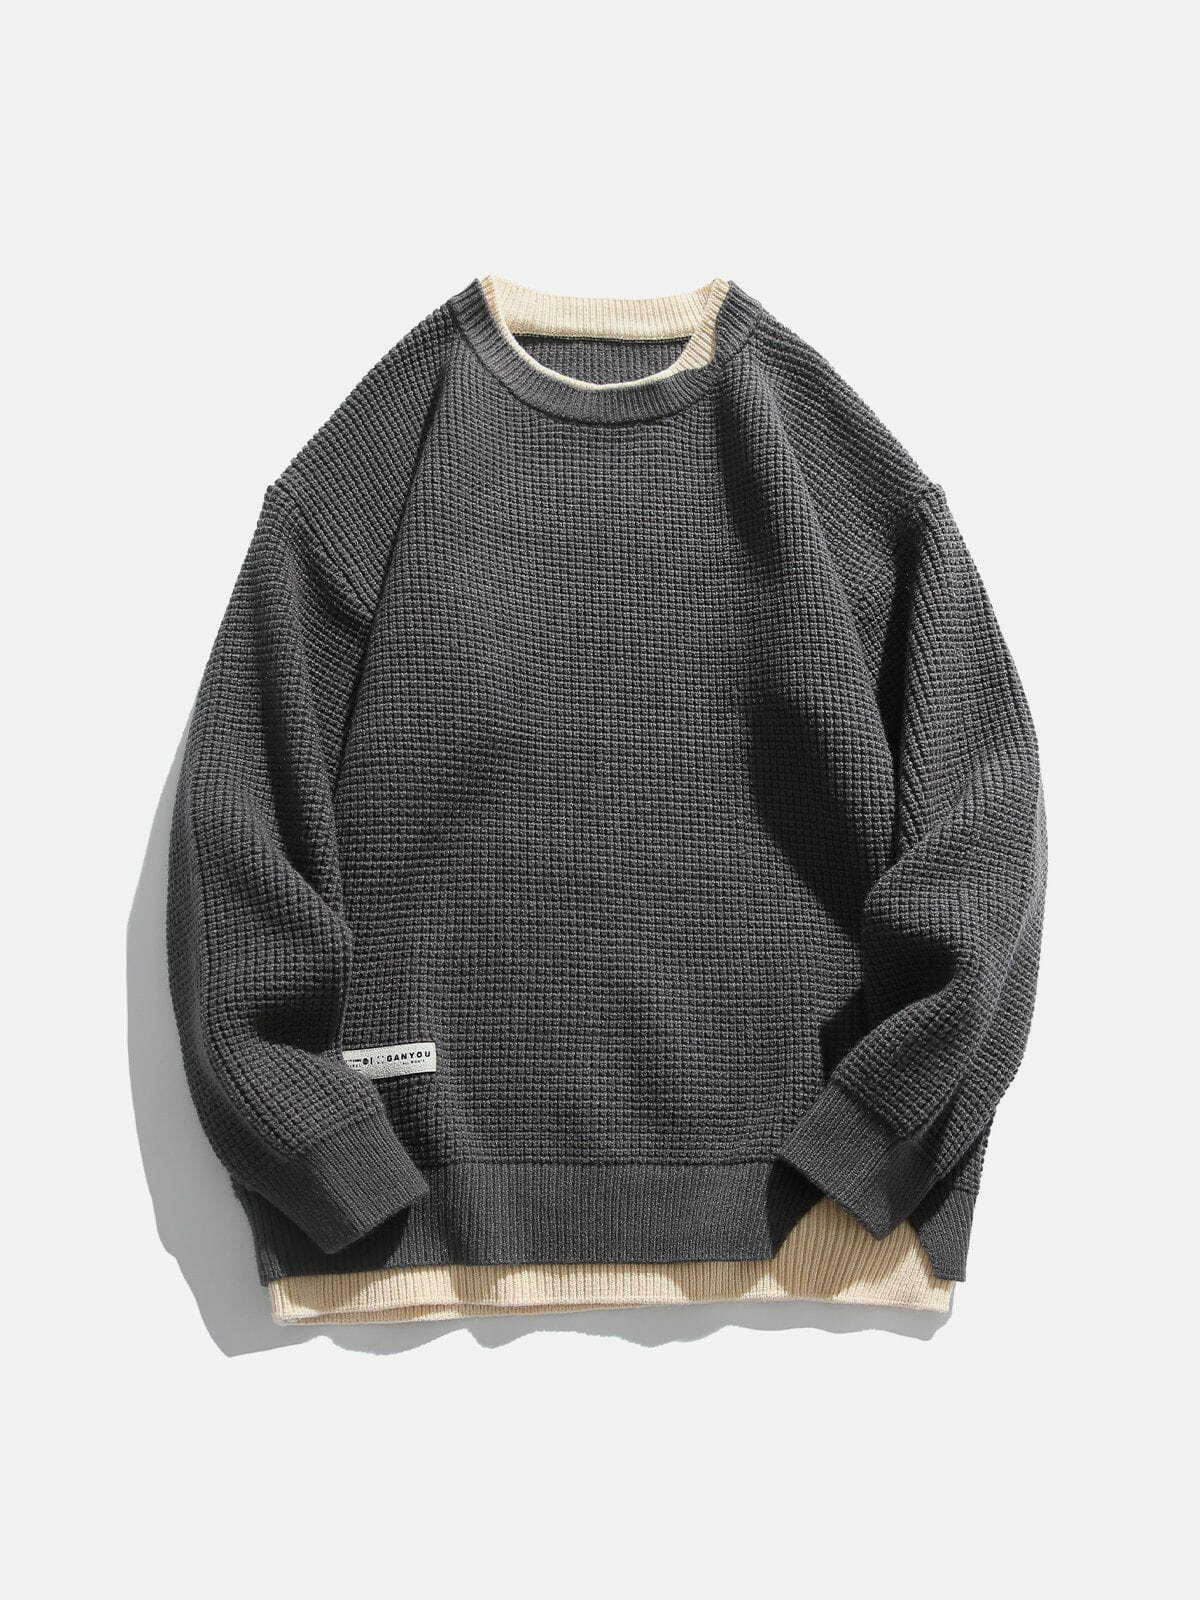 unique duallayer waffle sweater edgy & trendy streetwear 5334